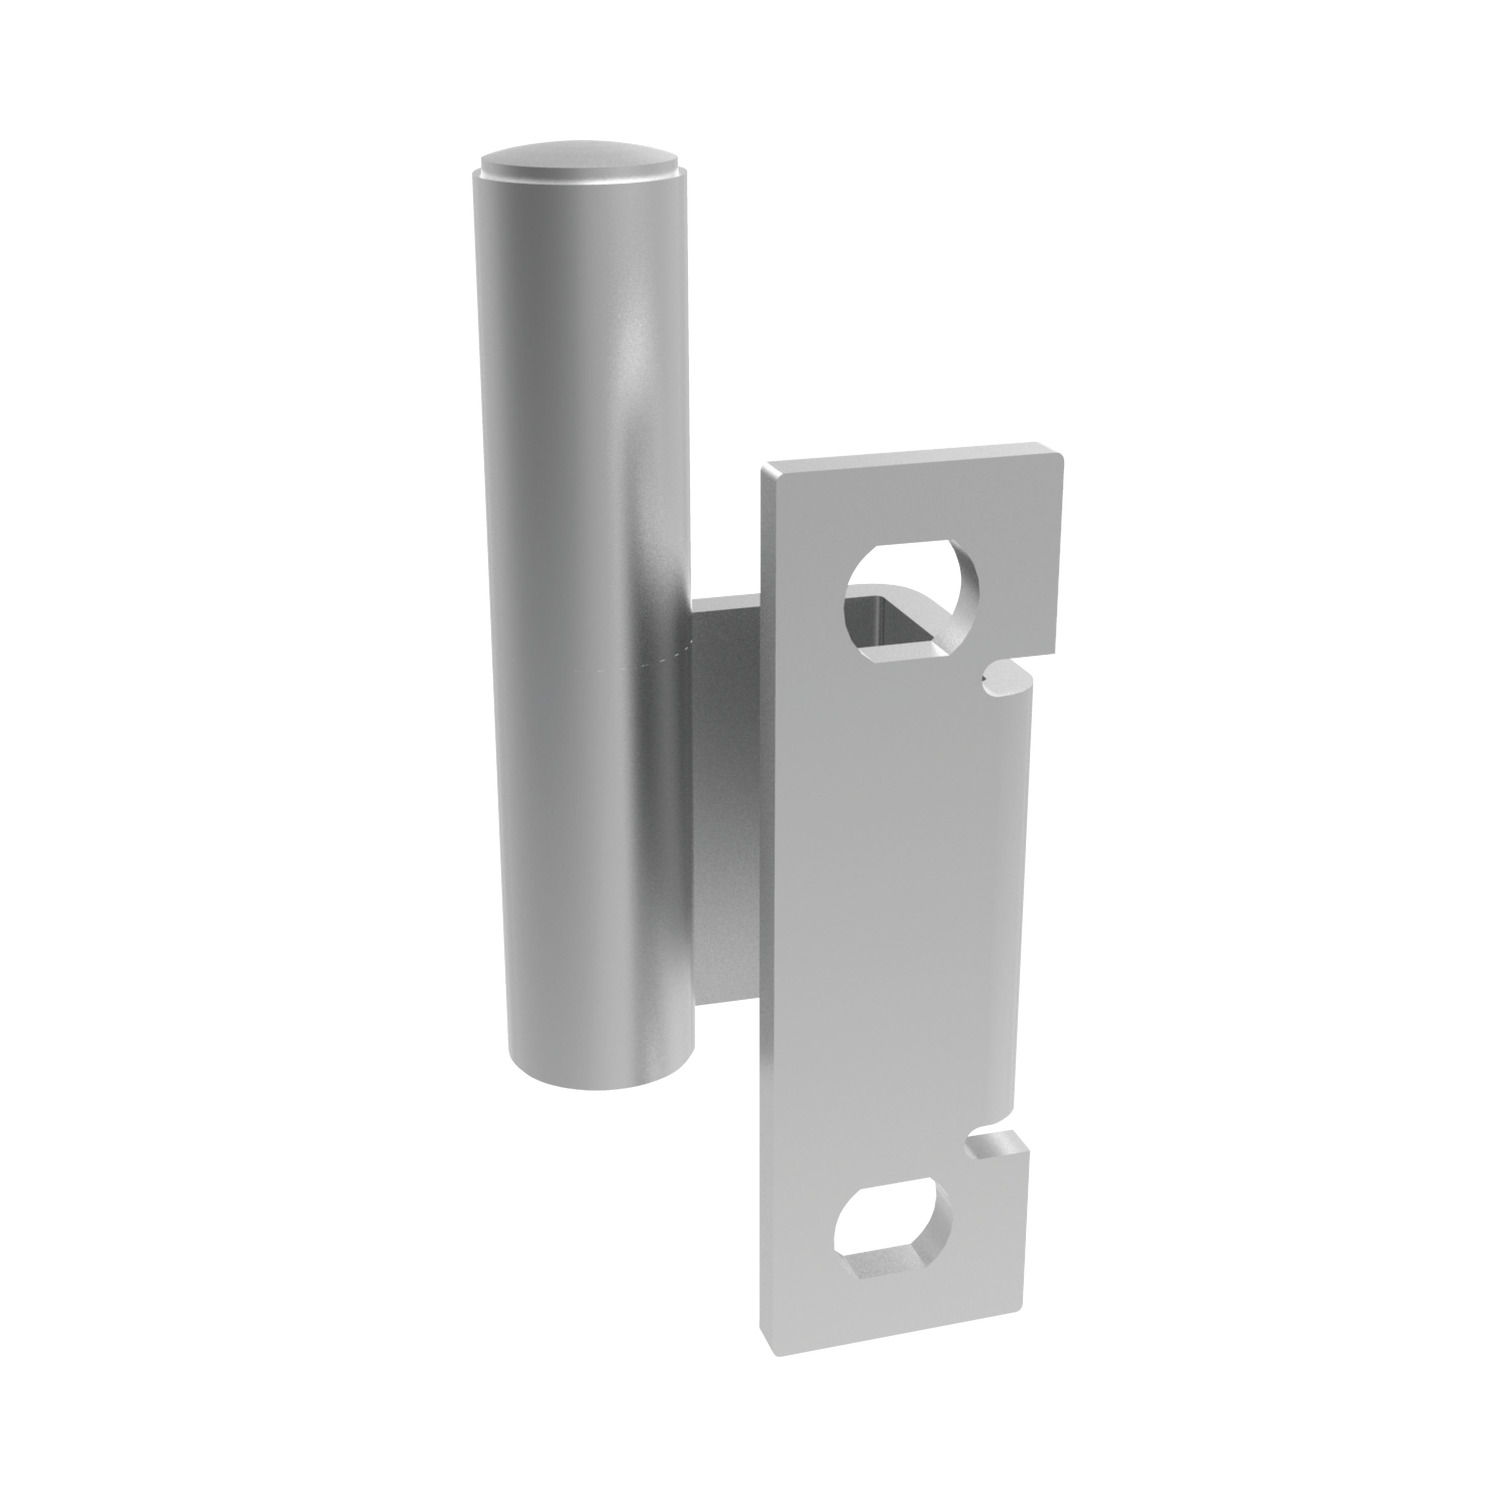 S2170 Concealed Pivot Hinges - Lift Off